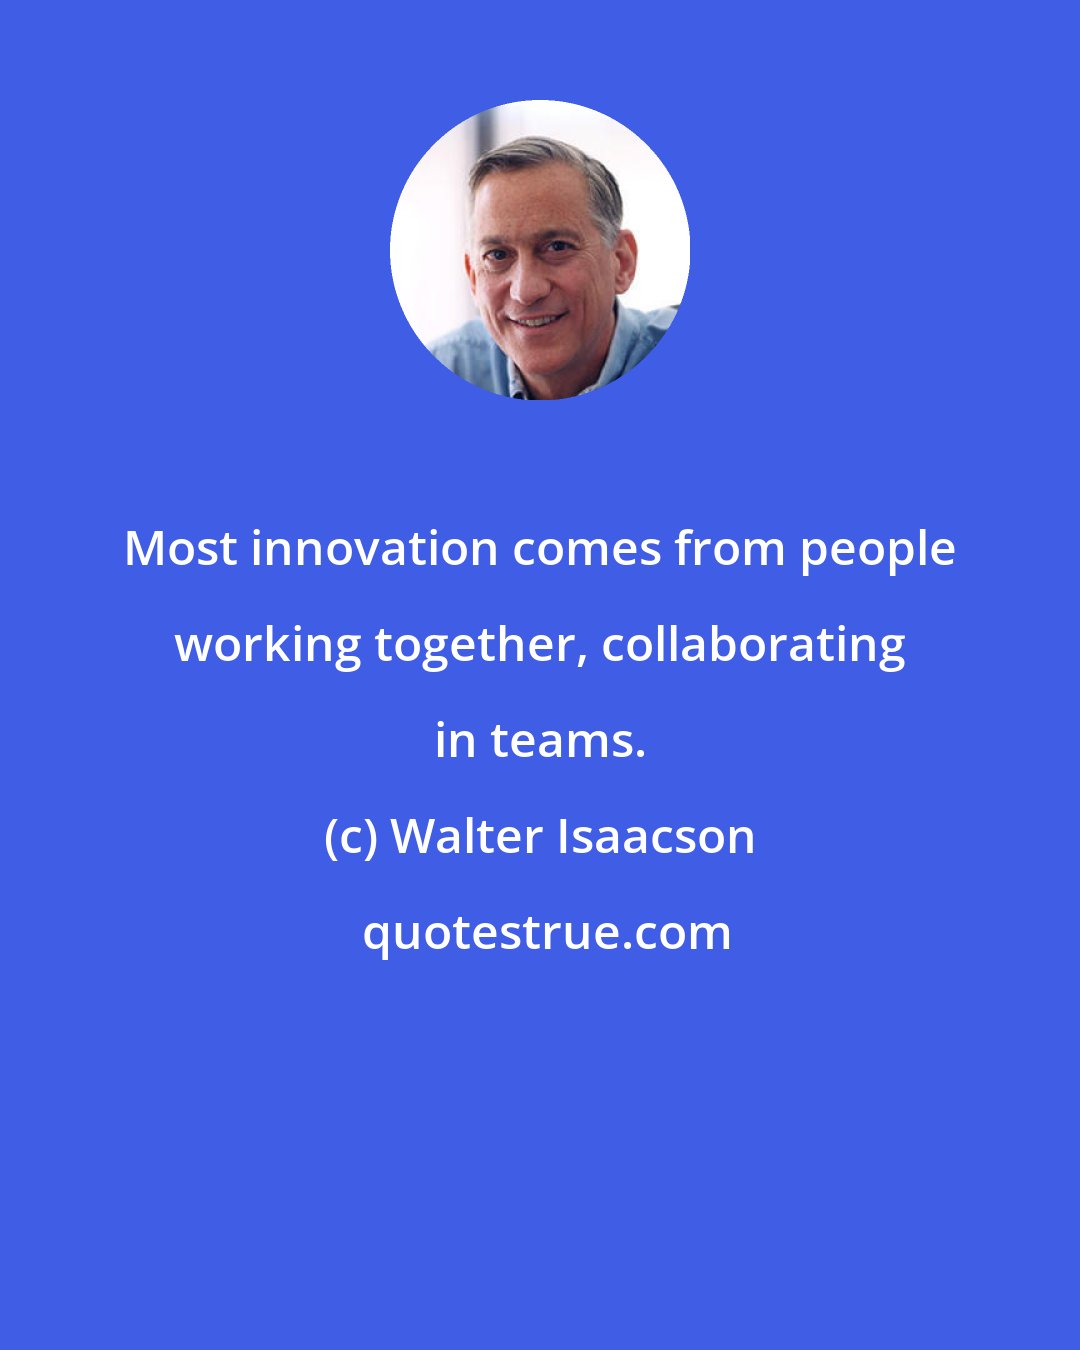 Walter Isaacson: Most innovation comes from people working together, collaborating in teams.